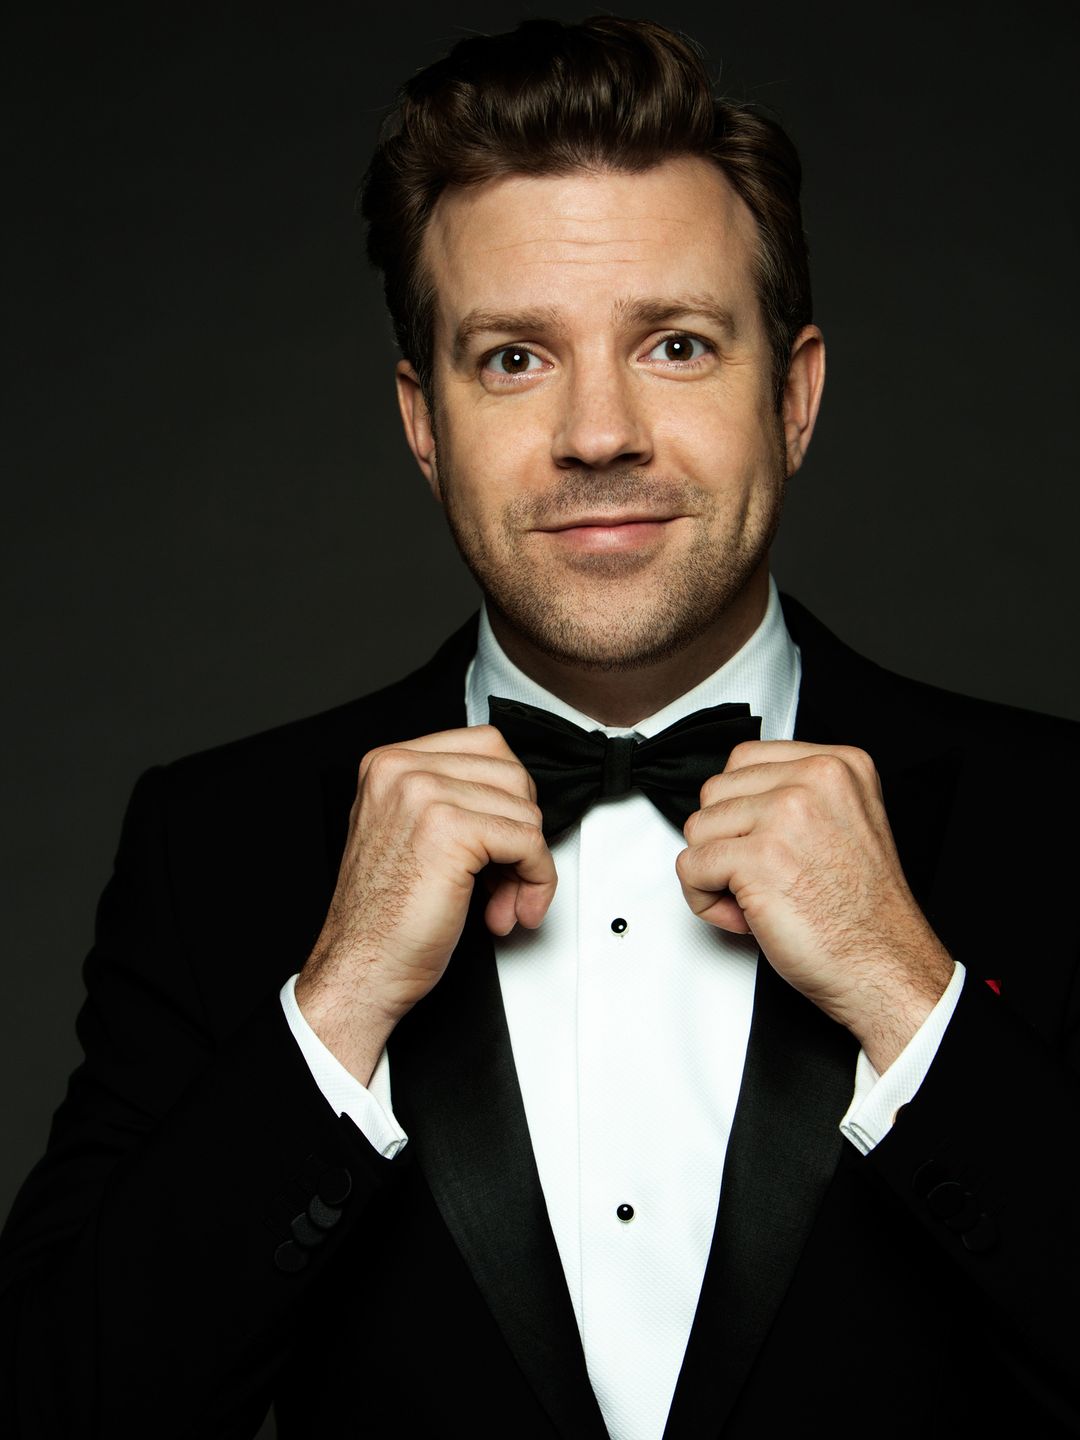 Jason Sudeikis who is his father